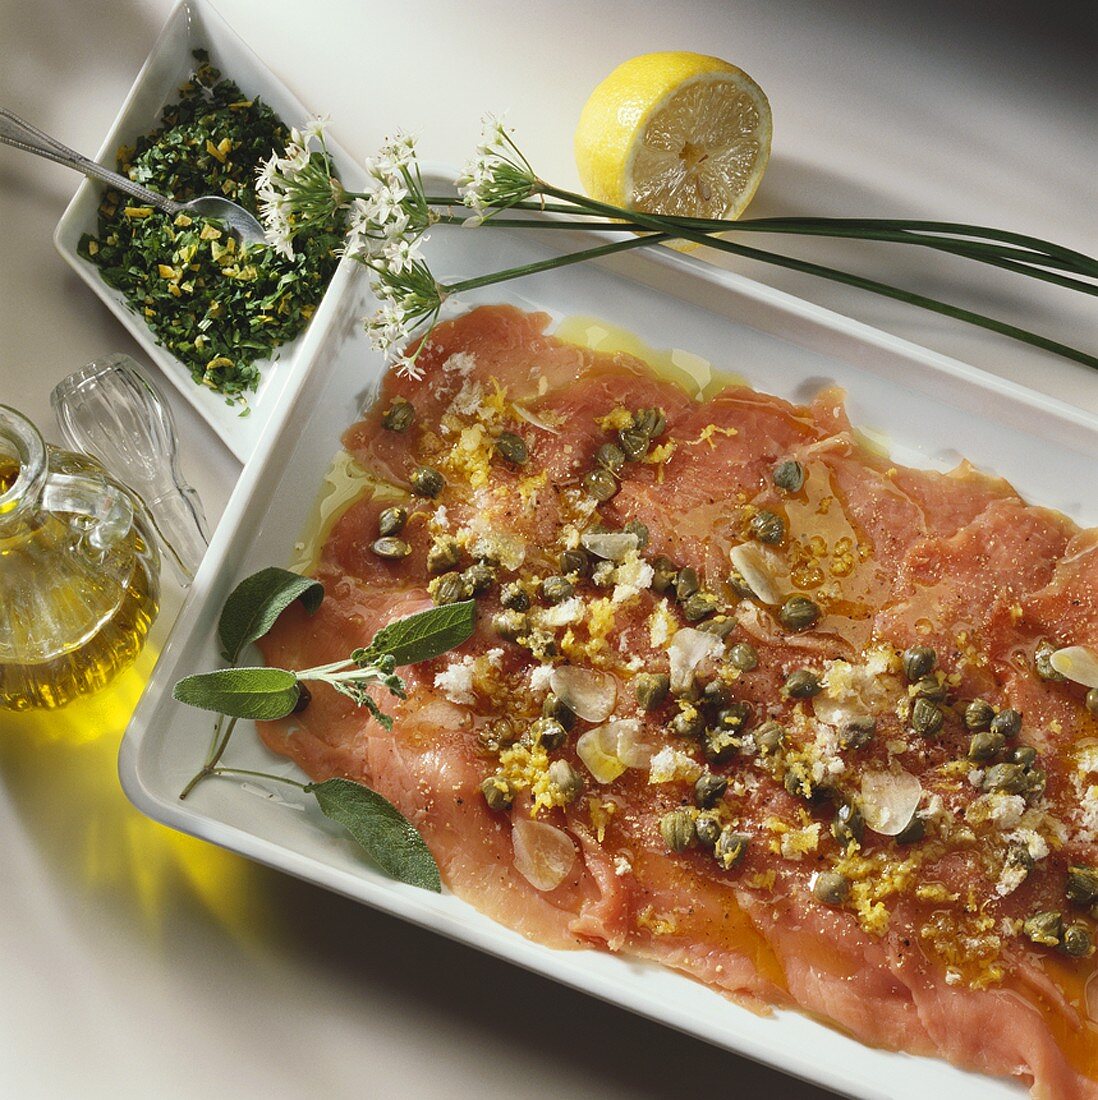 Veal carpaccio (Raw, marinated slices of veal)